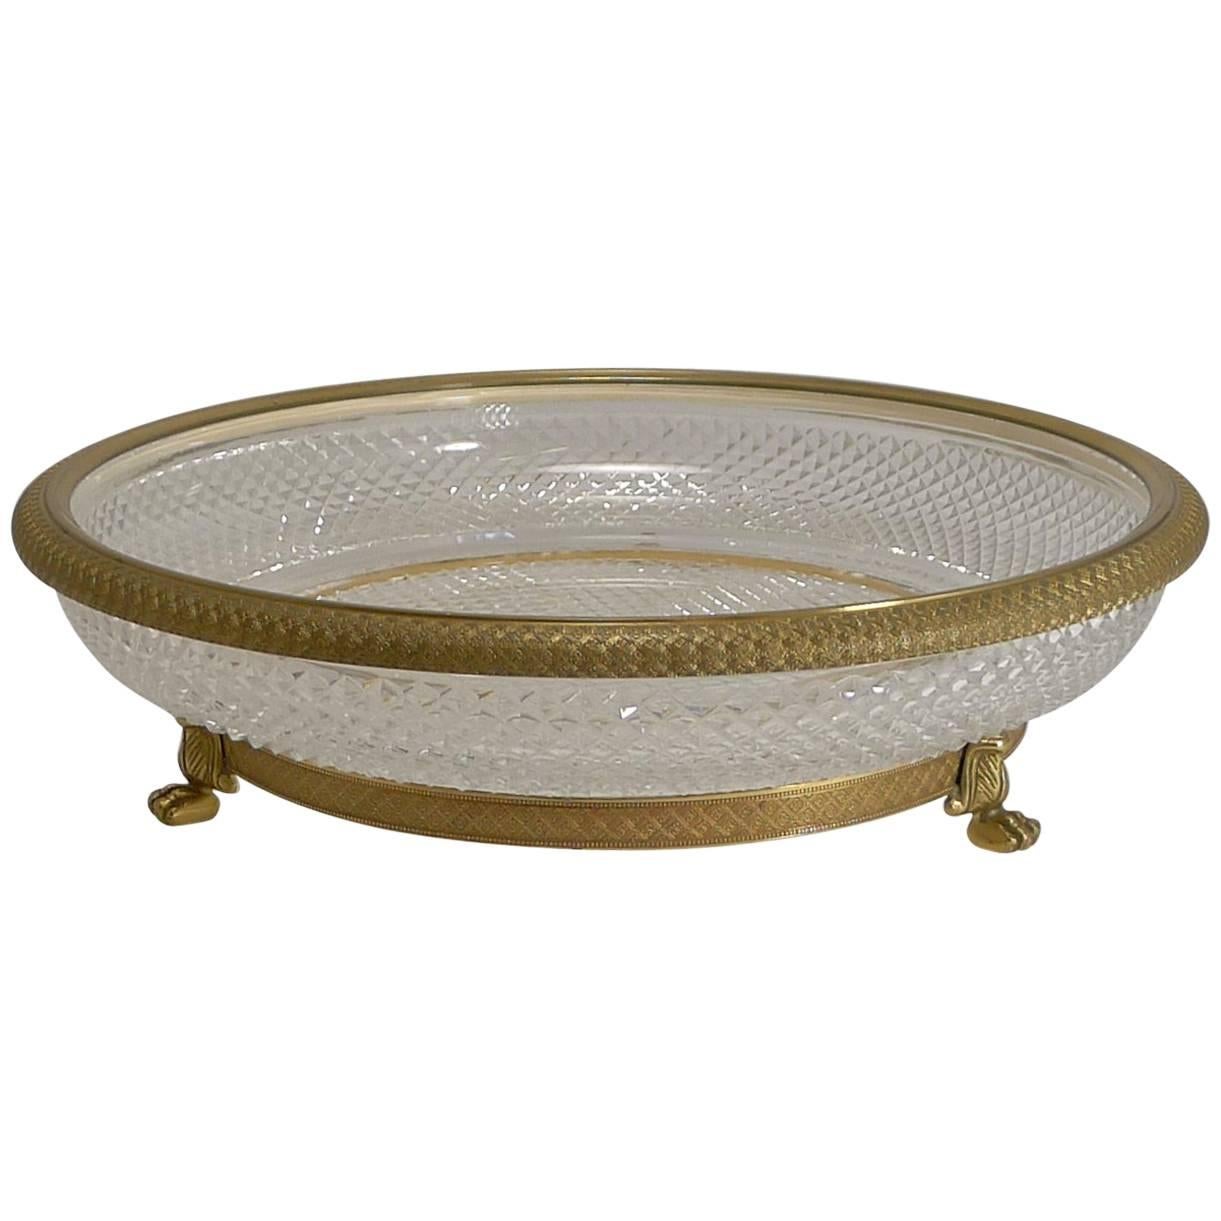 Large French Cut Crystal and Gilded Bronze Centrepiece Dish or Bowl c.1890